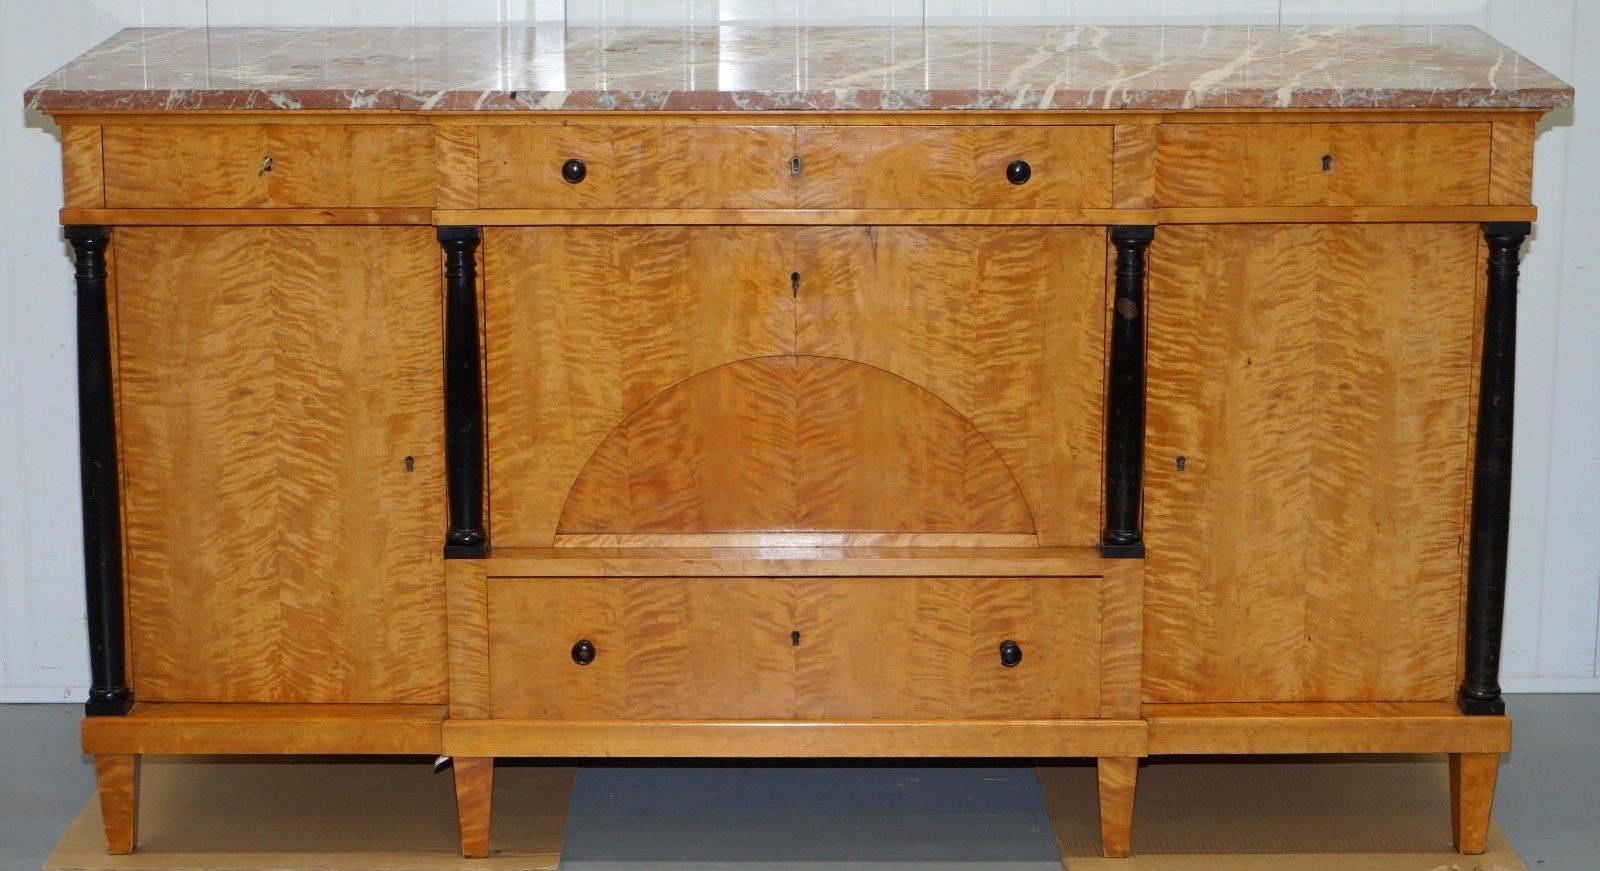 Wimbledon-Furniture

Wimbledon-Furniture is delighted to offer for sale this lovely solid flamed satin birch Swedish circa 1880 Biedermeier sideboard with marble top

Please note the marble top which is removable is cracked right the way through,